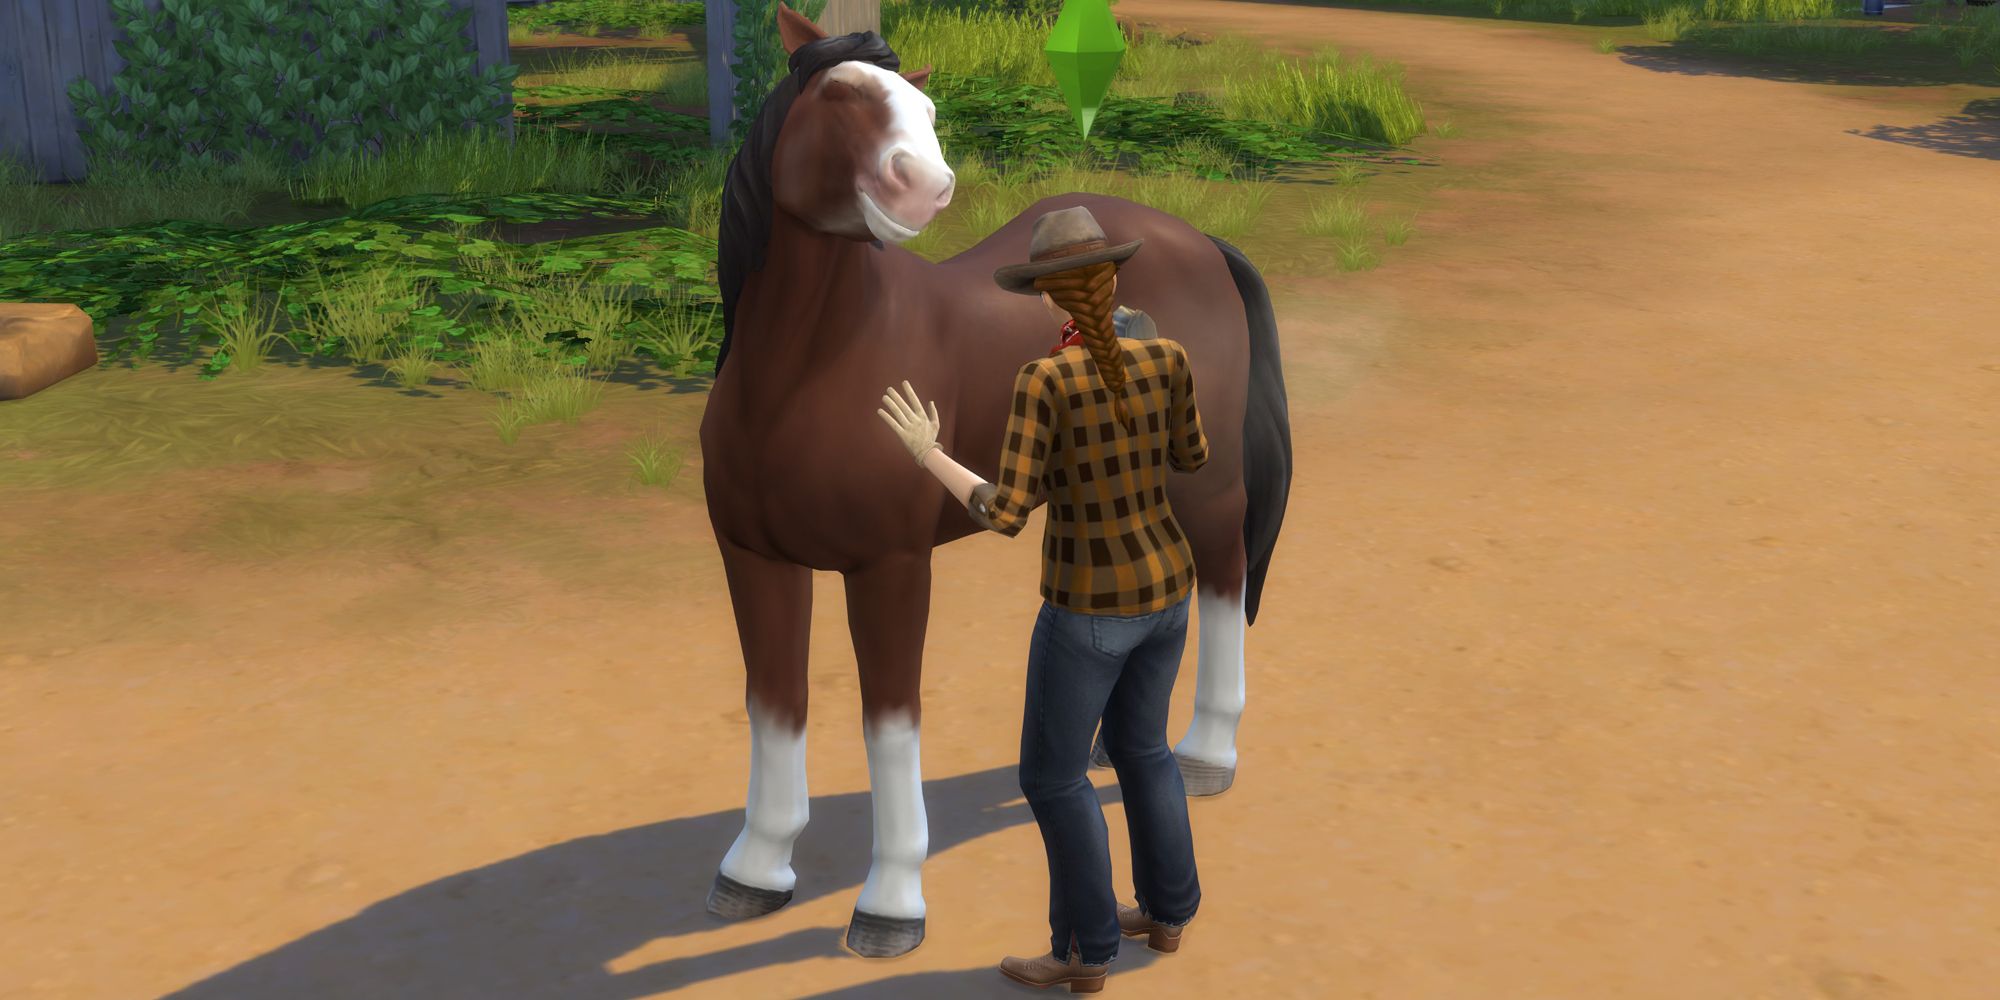 A sim brushing an elder horse in The Sims 4. The horse has its eyes closed, looking comfortable and happy.